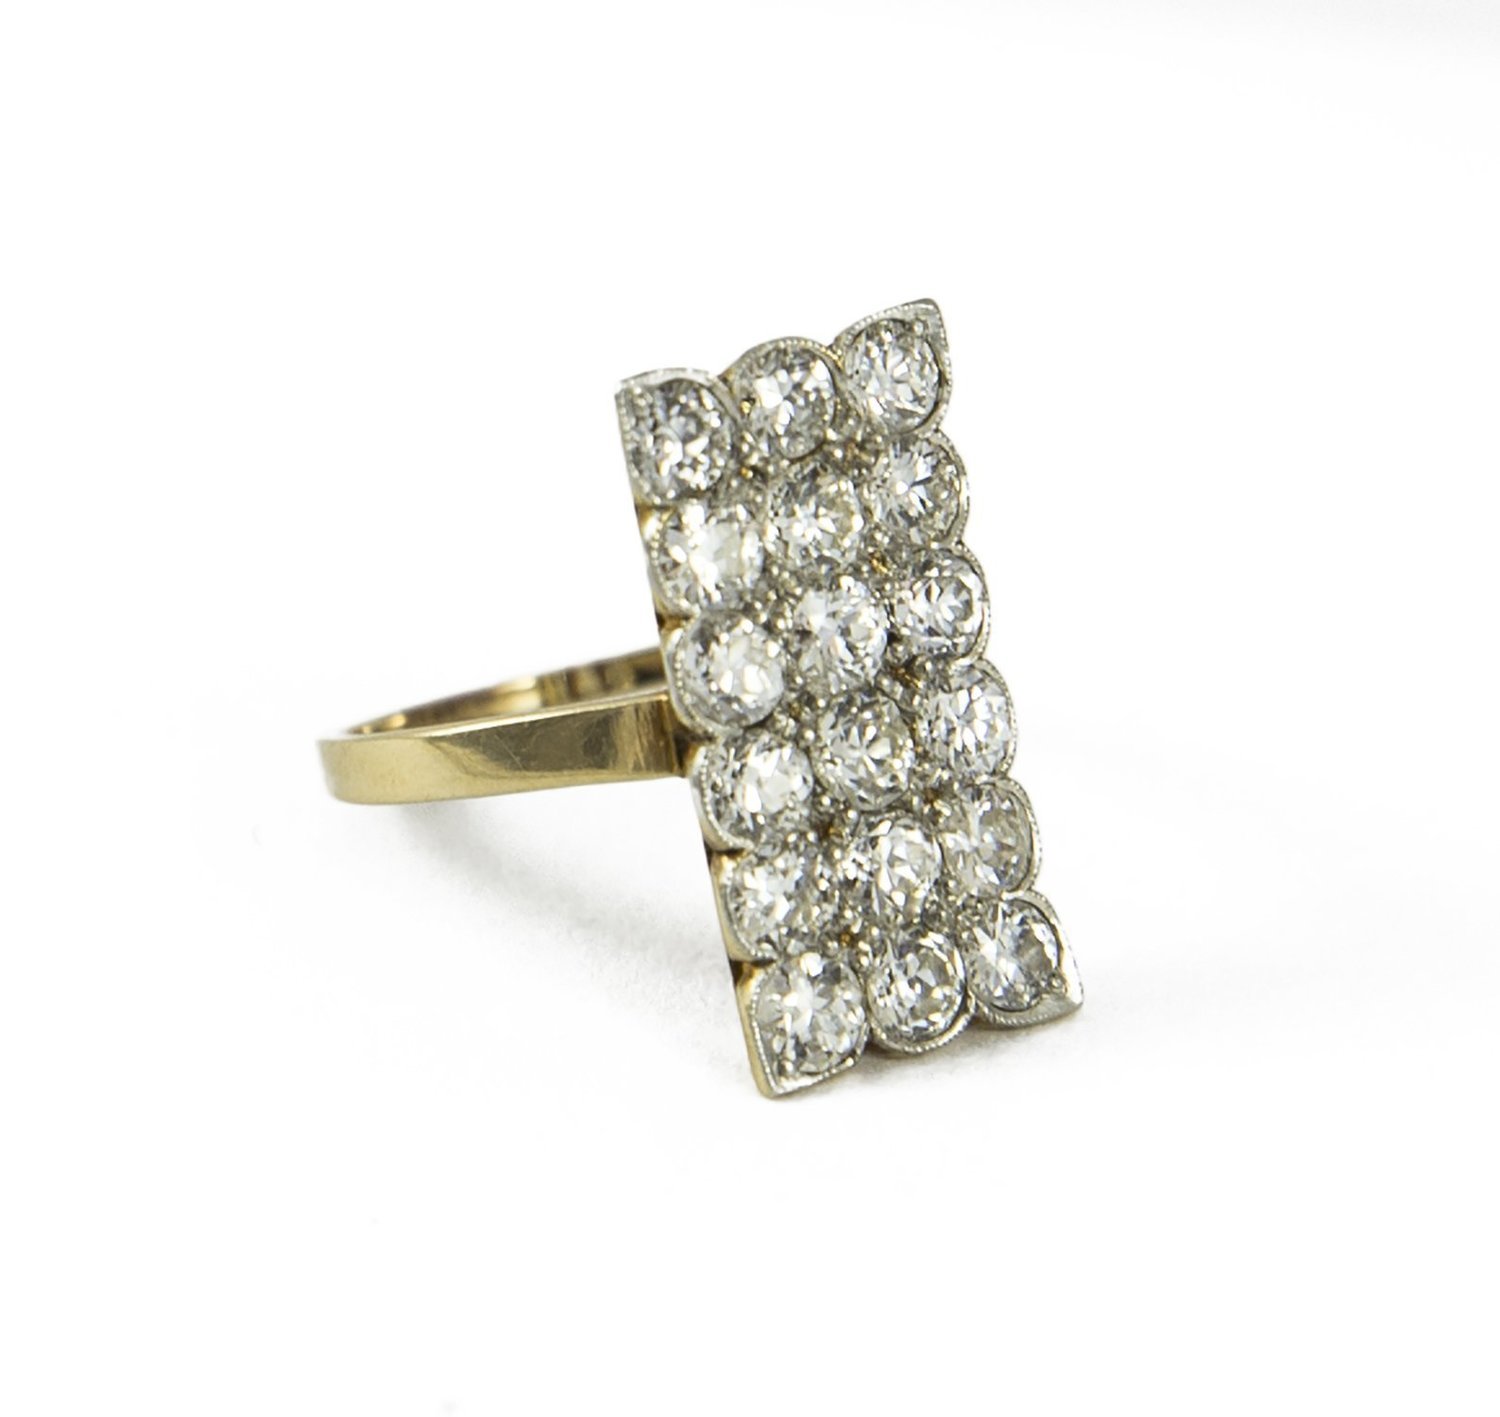 Antique Edwardian Diamond and 18 kt, White and Yellow Gold Plaque Ring